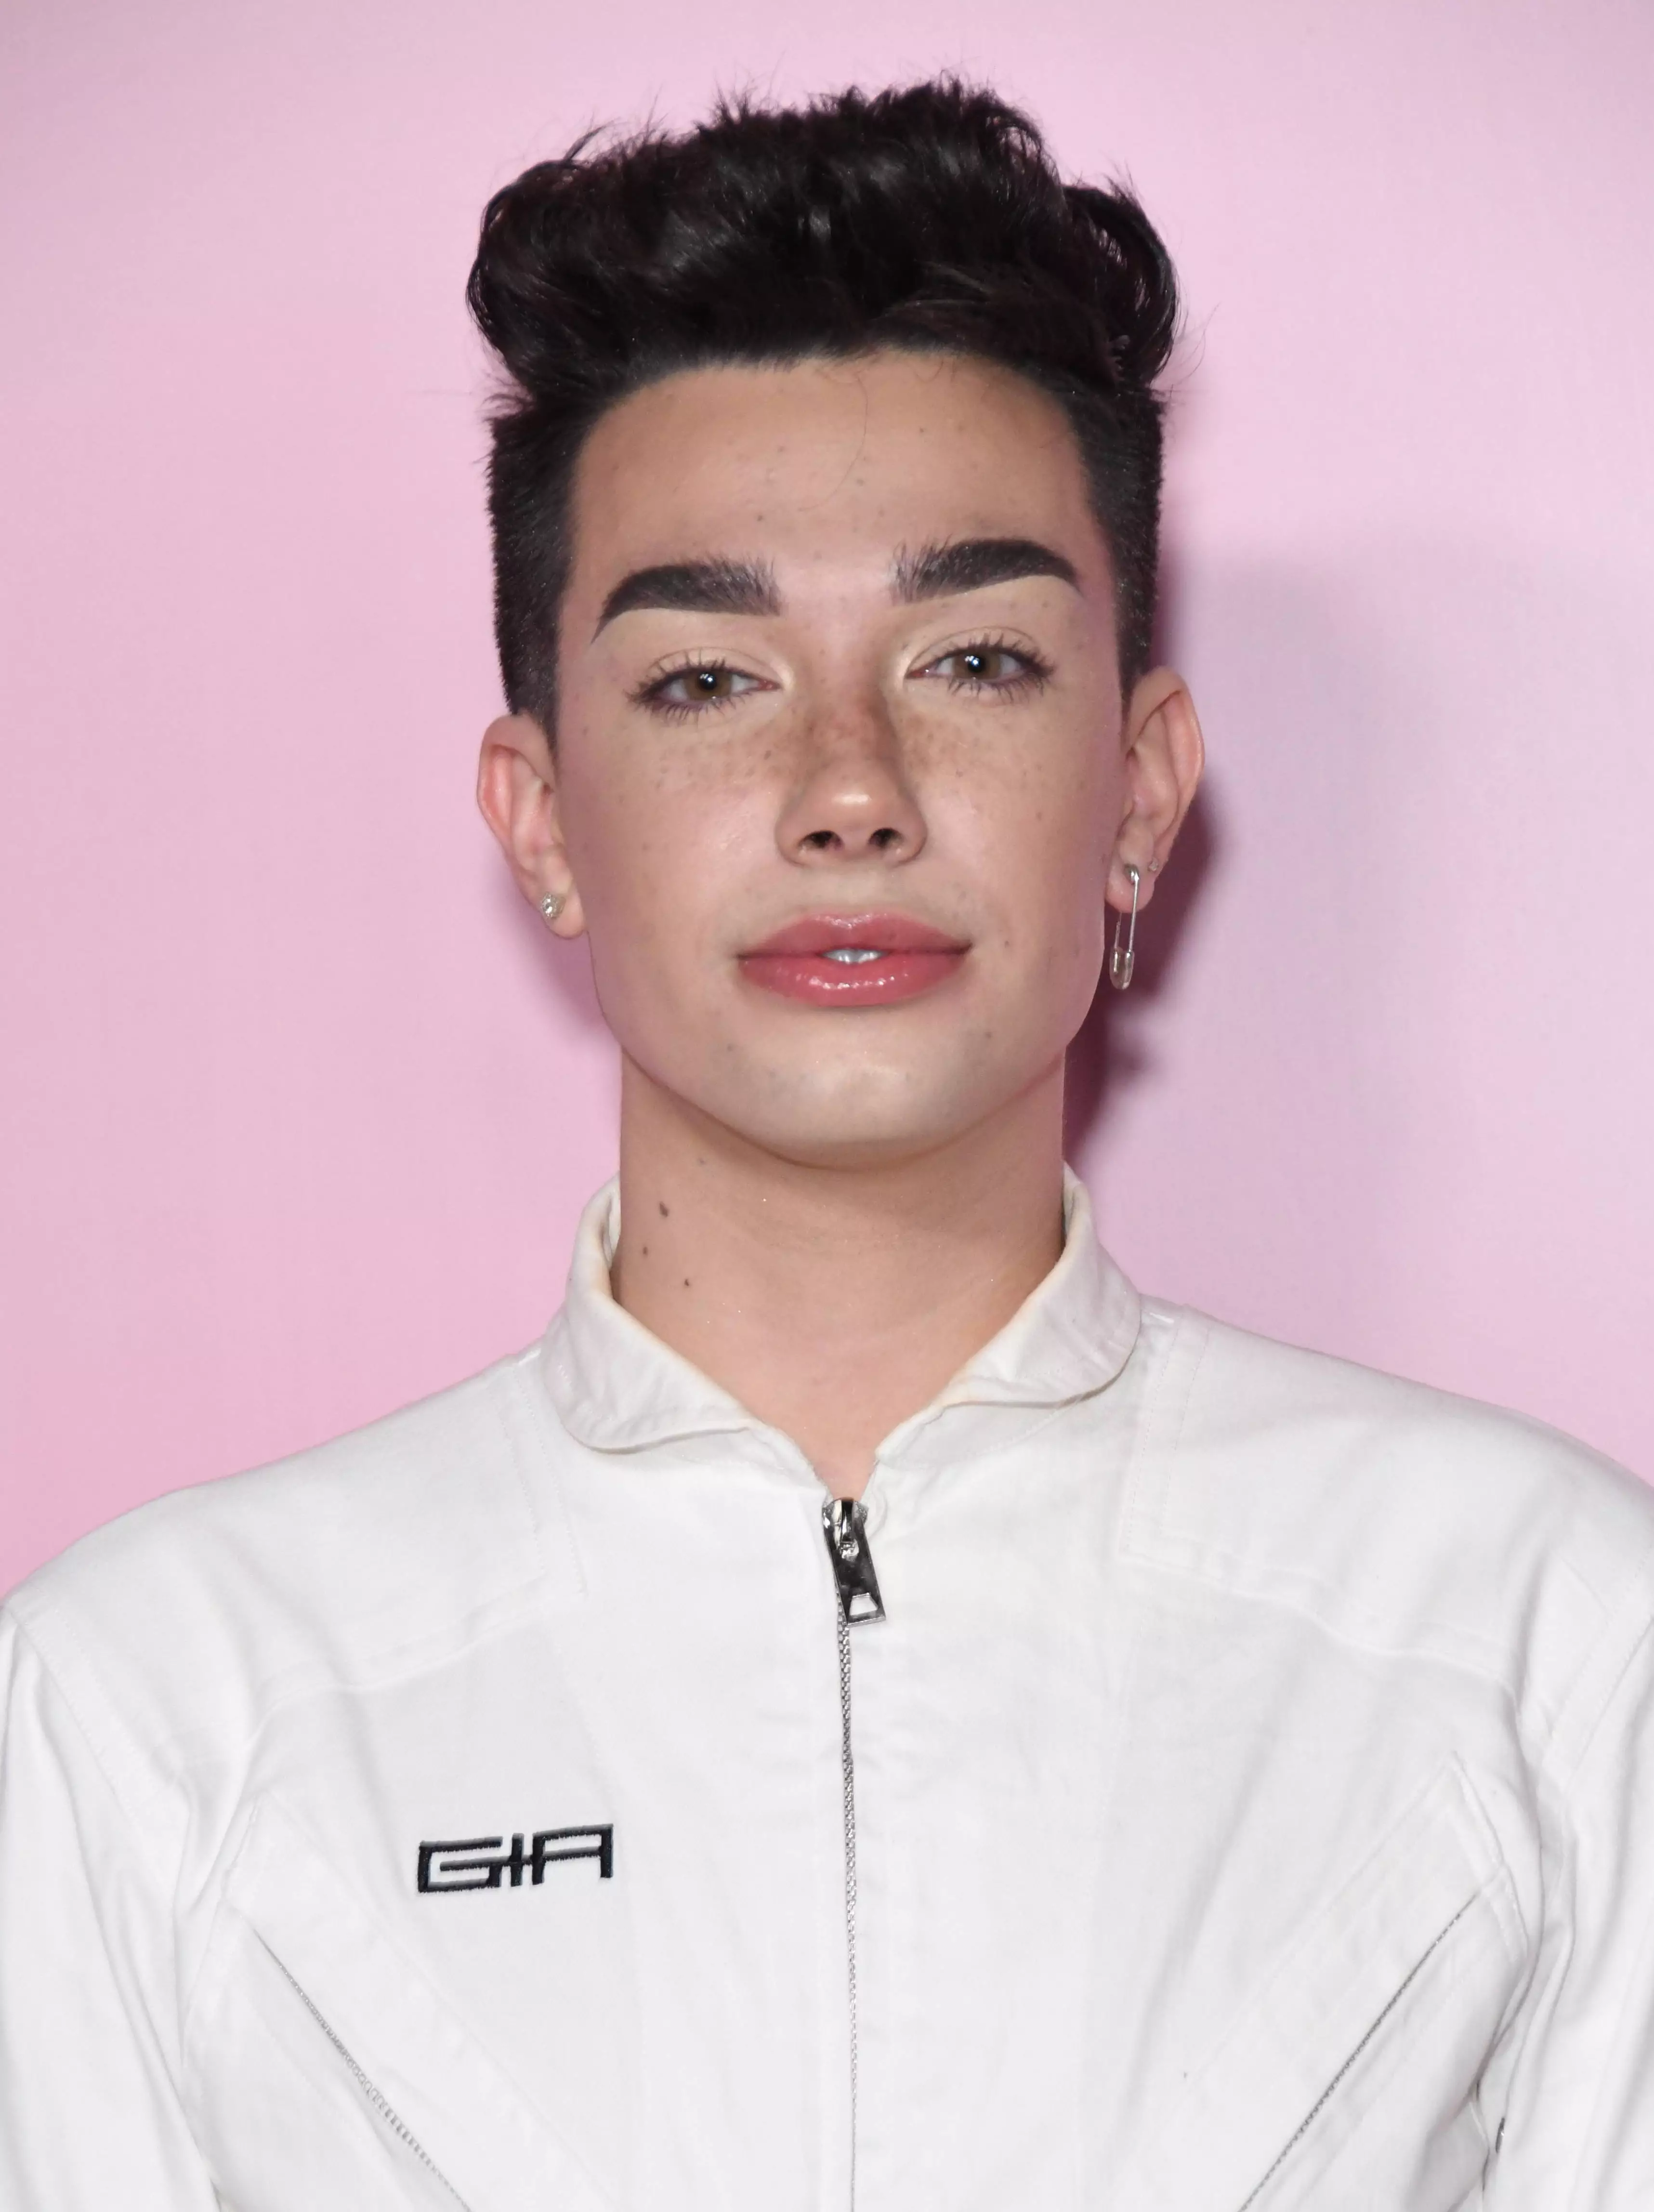 James Charles has been accused of abusing his power.